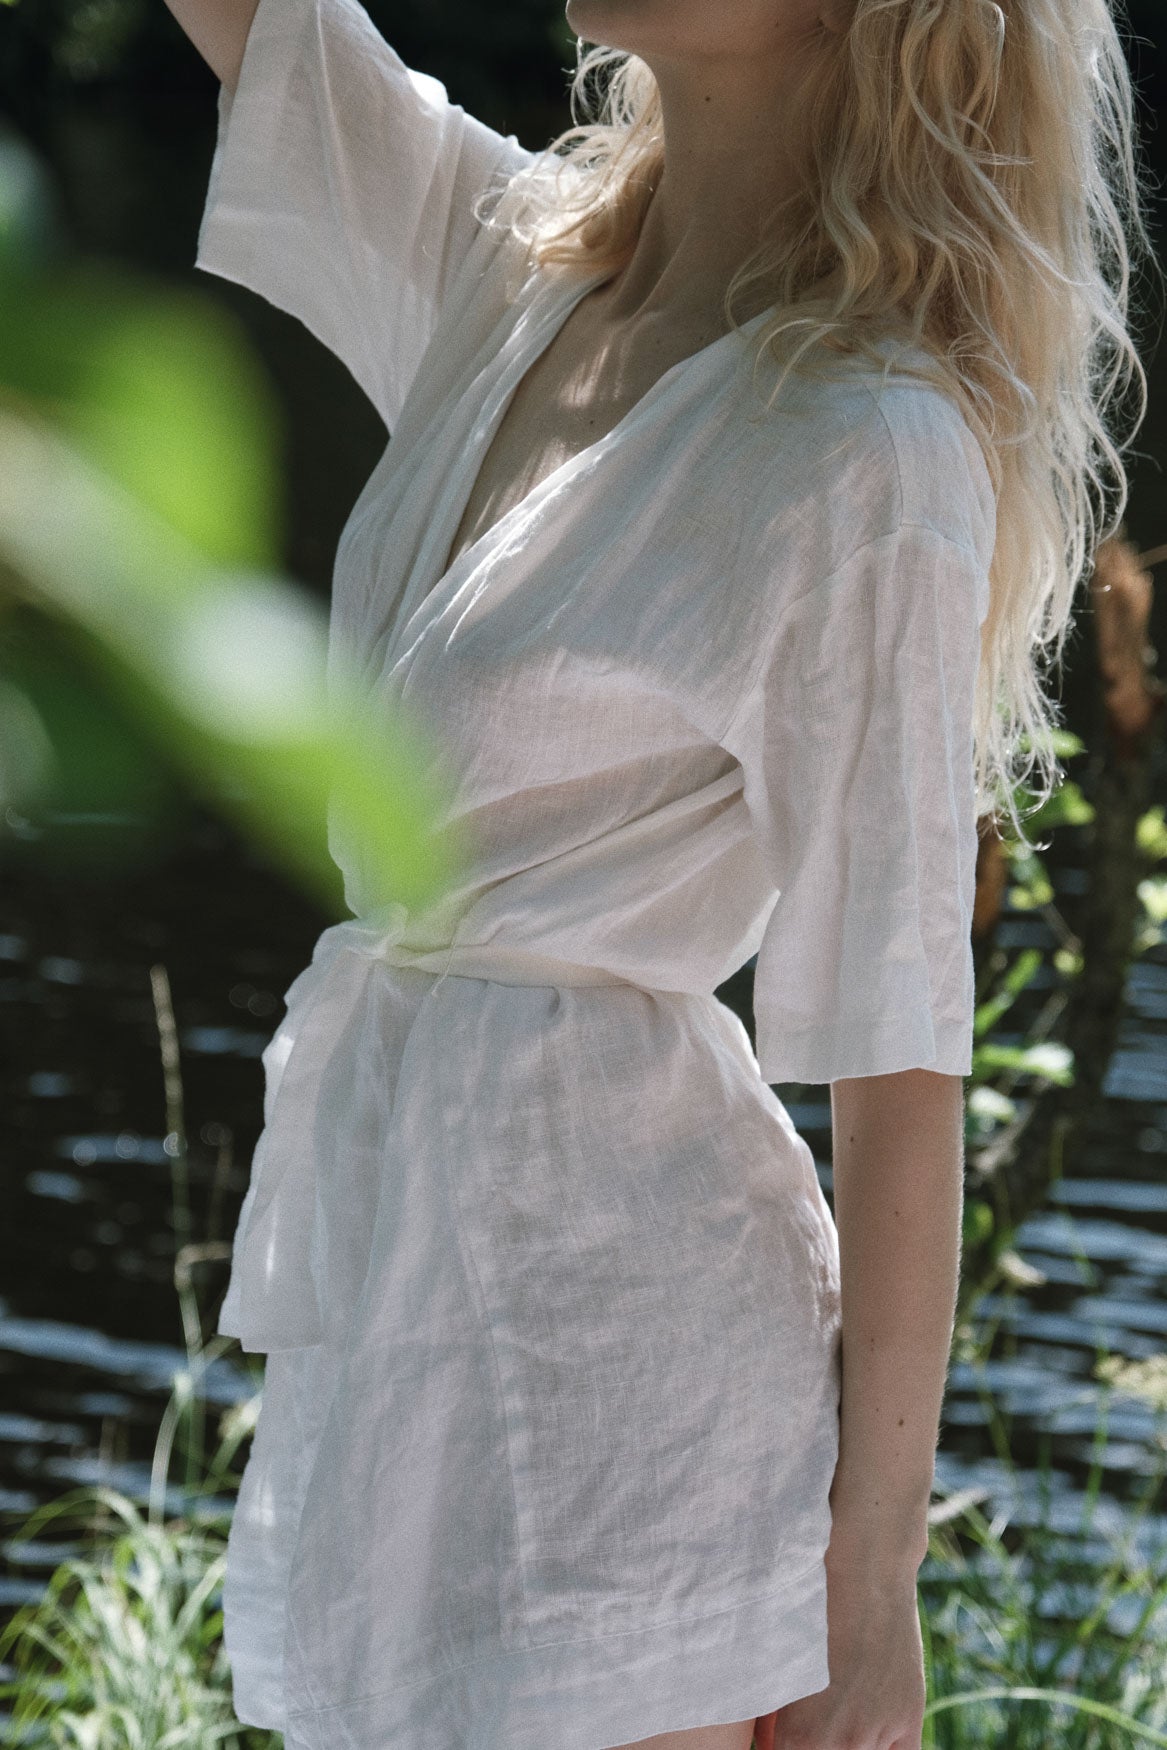 Organic, sustainable and white short night robe with belt and half sleeve length. This linen kimono is natural, comfortable, soft and pure. This bathrobe is a conscious and healthy choice for your body and environment. Handmade in the North.